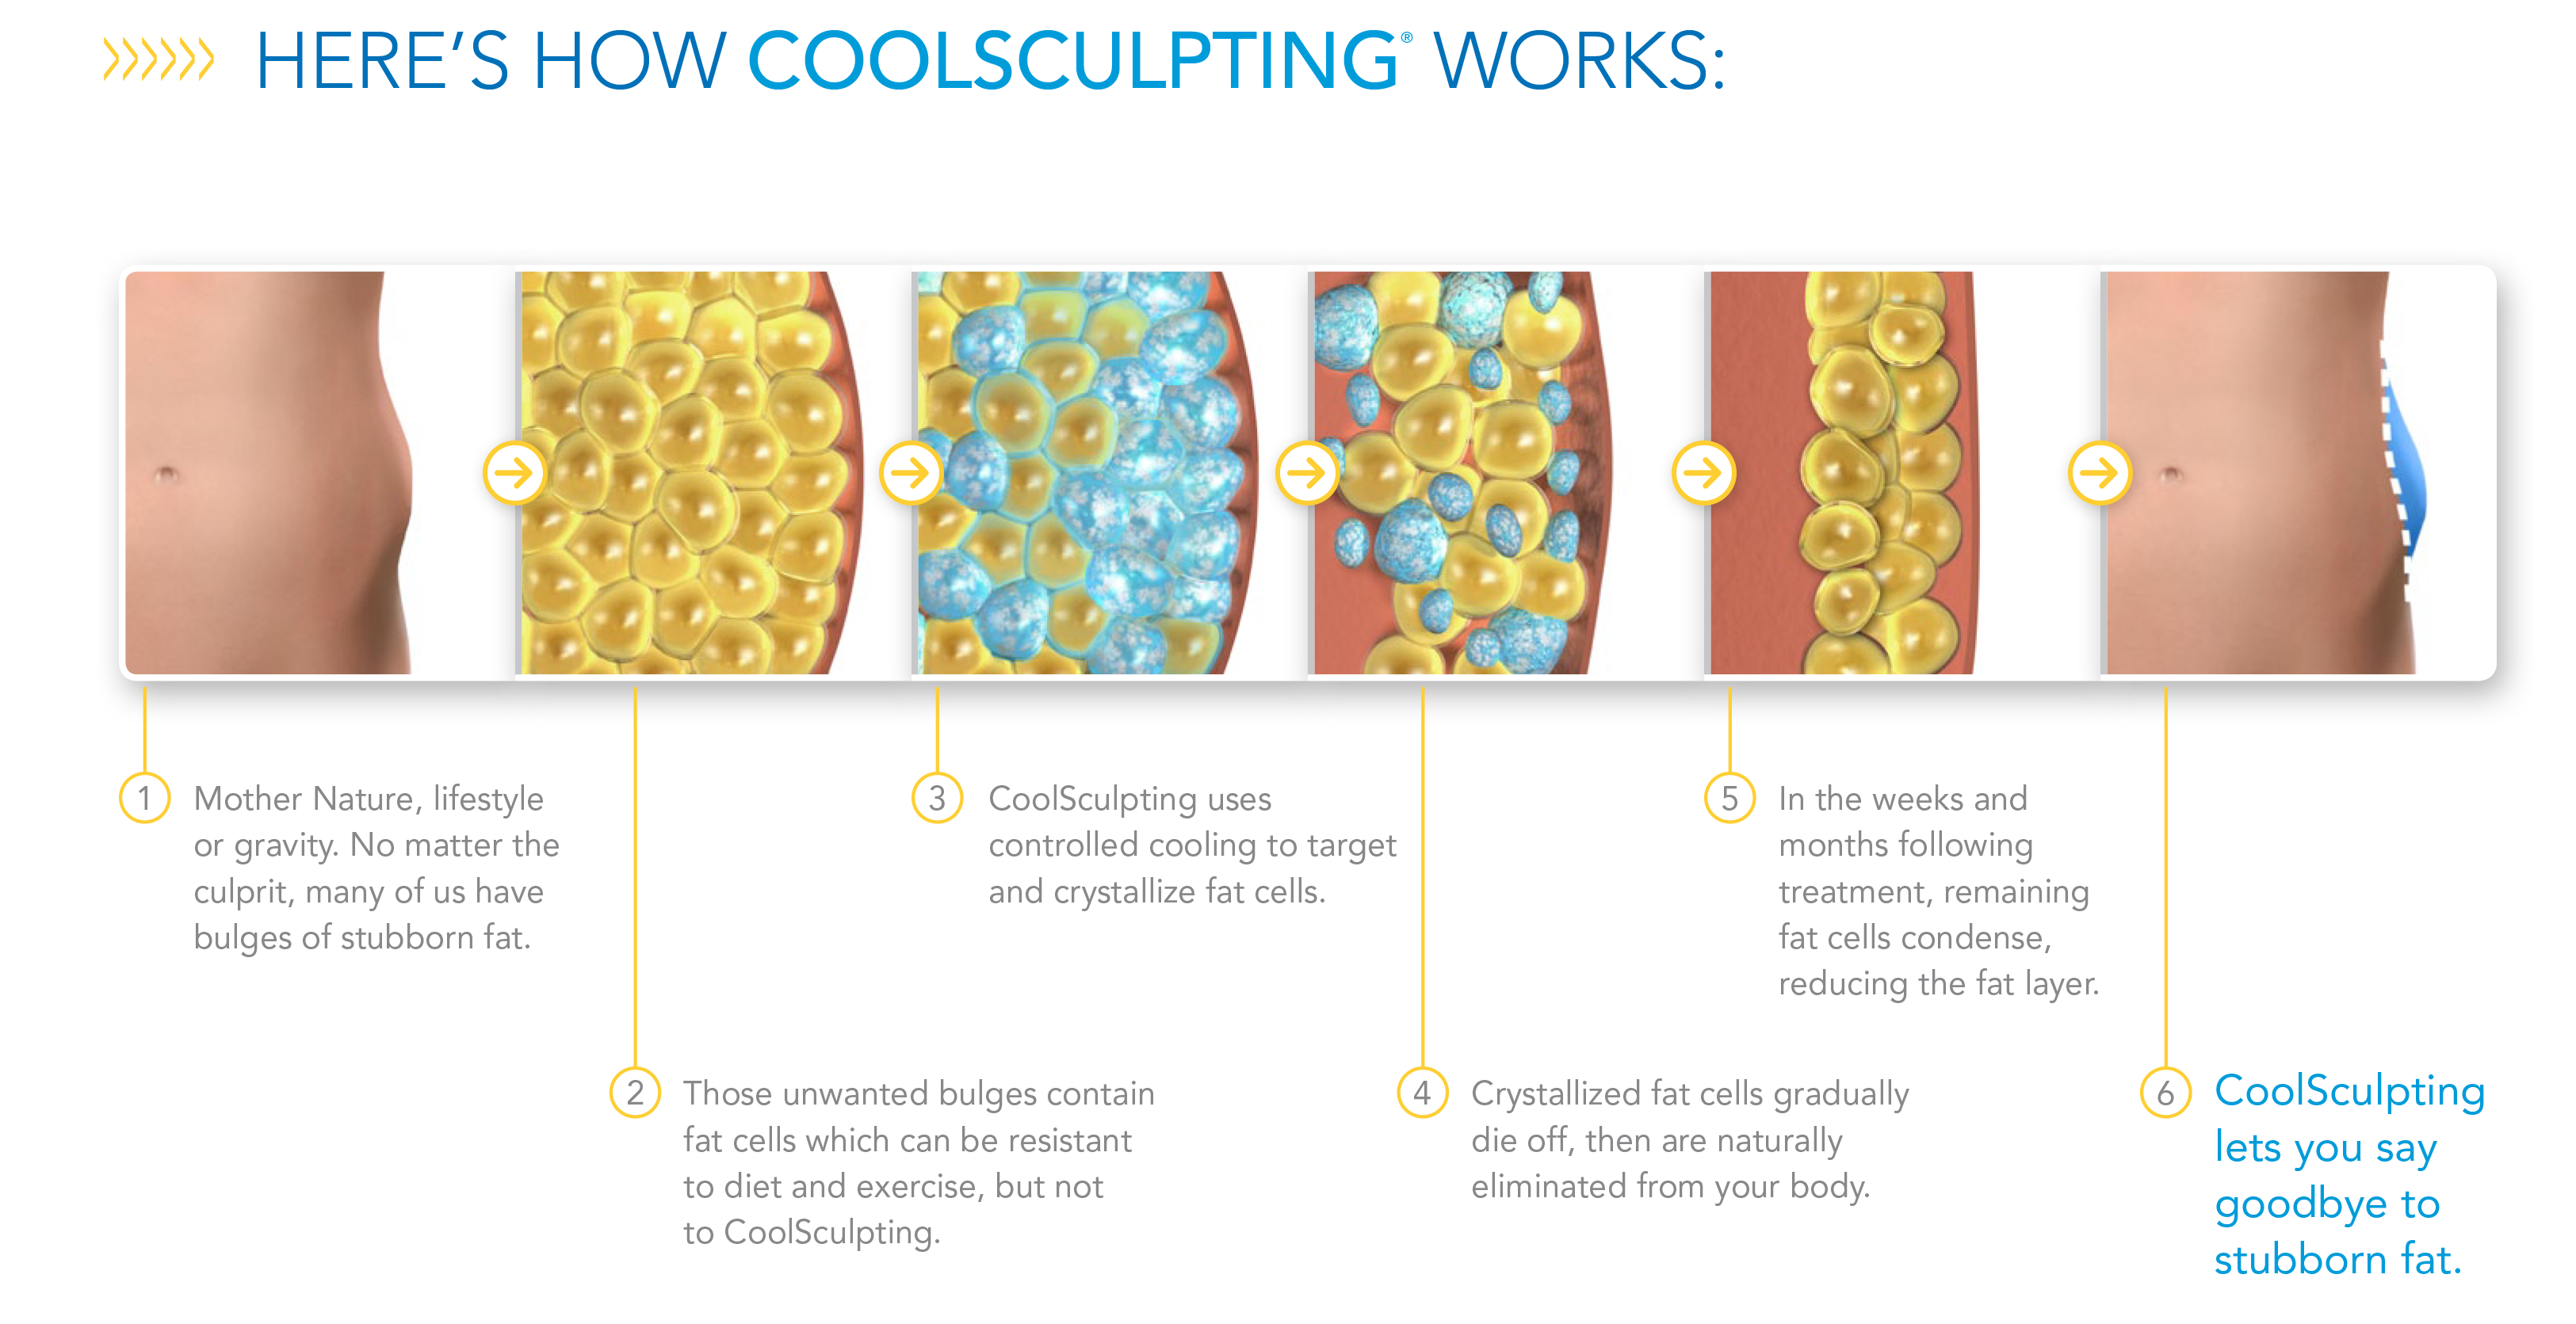 How Coolsculpting works